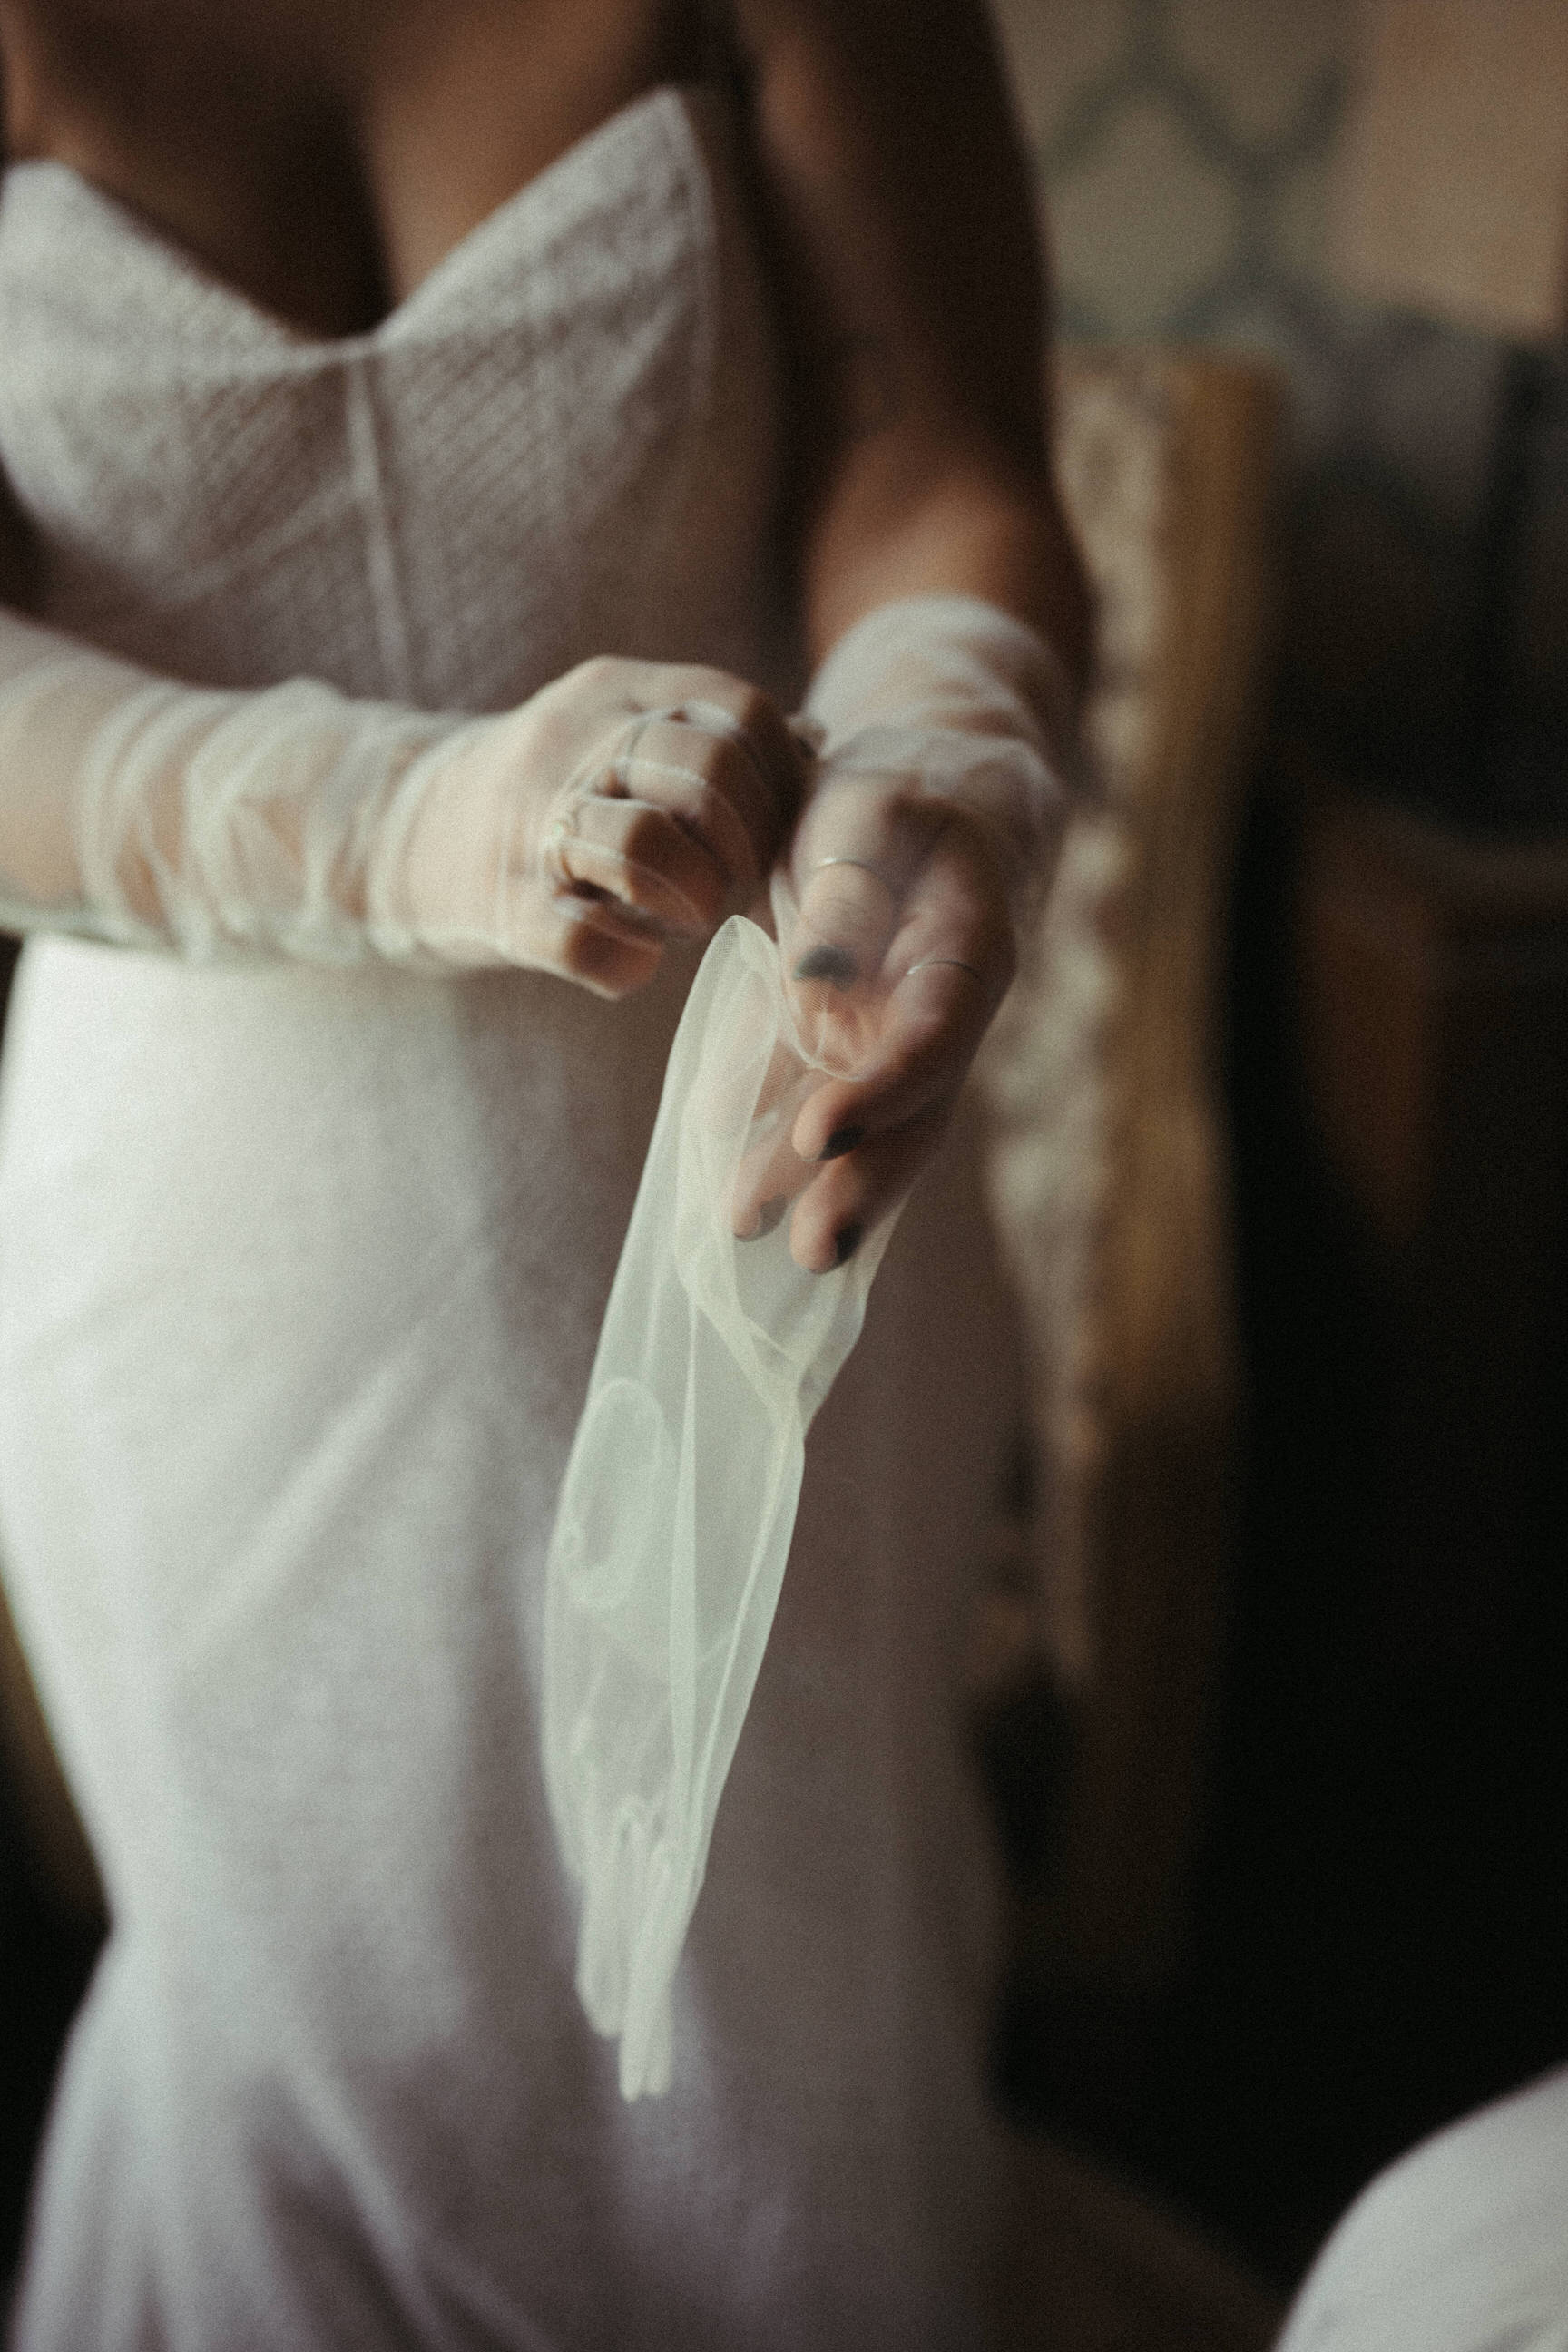 putting on wedding glove set with fingers made from see through tulle